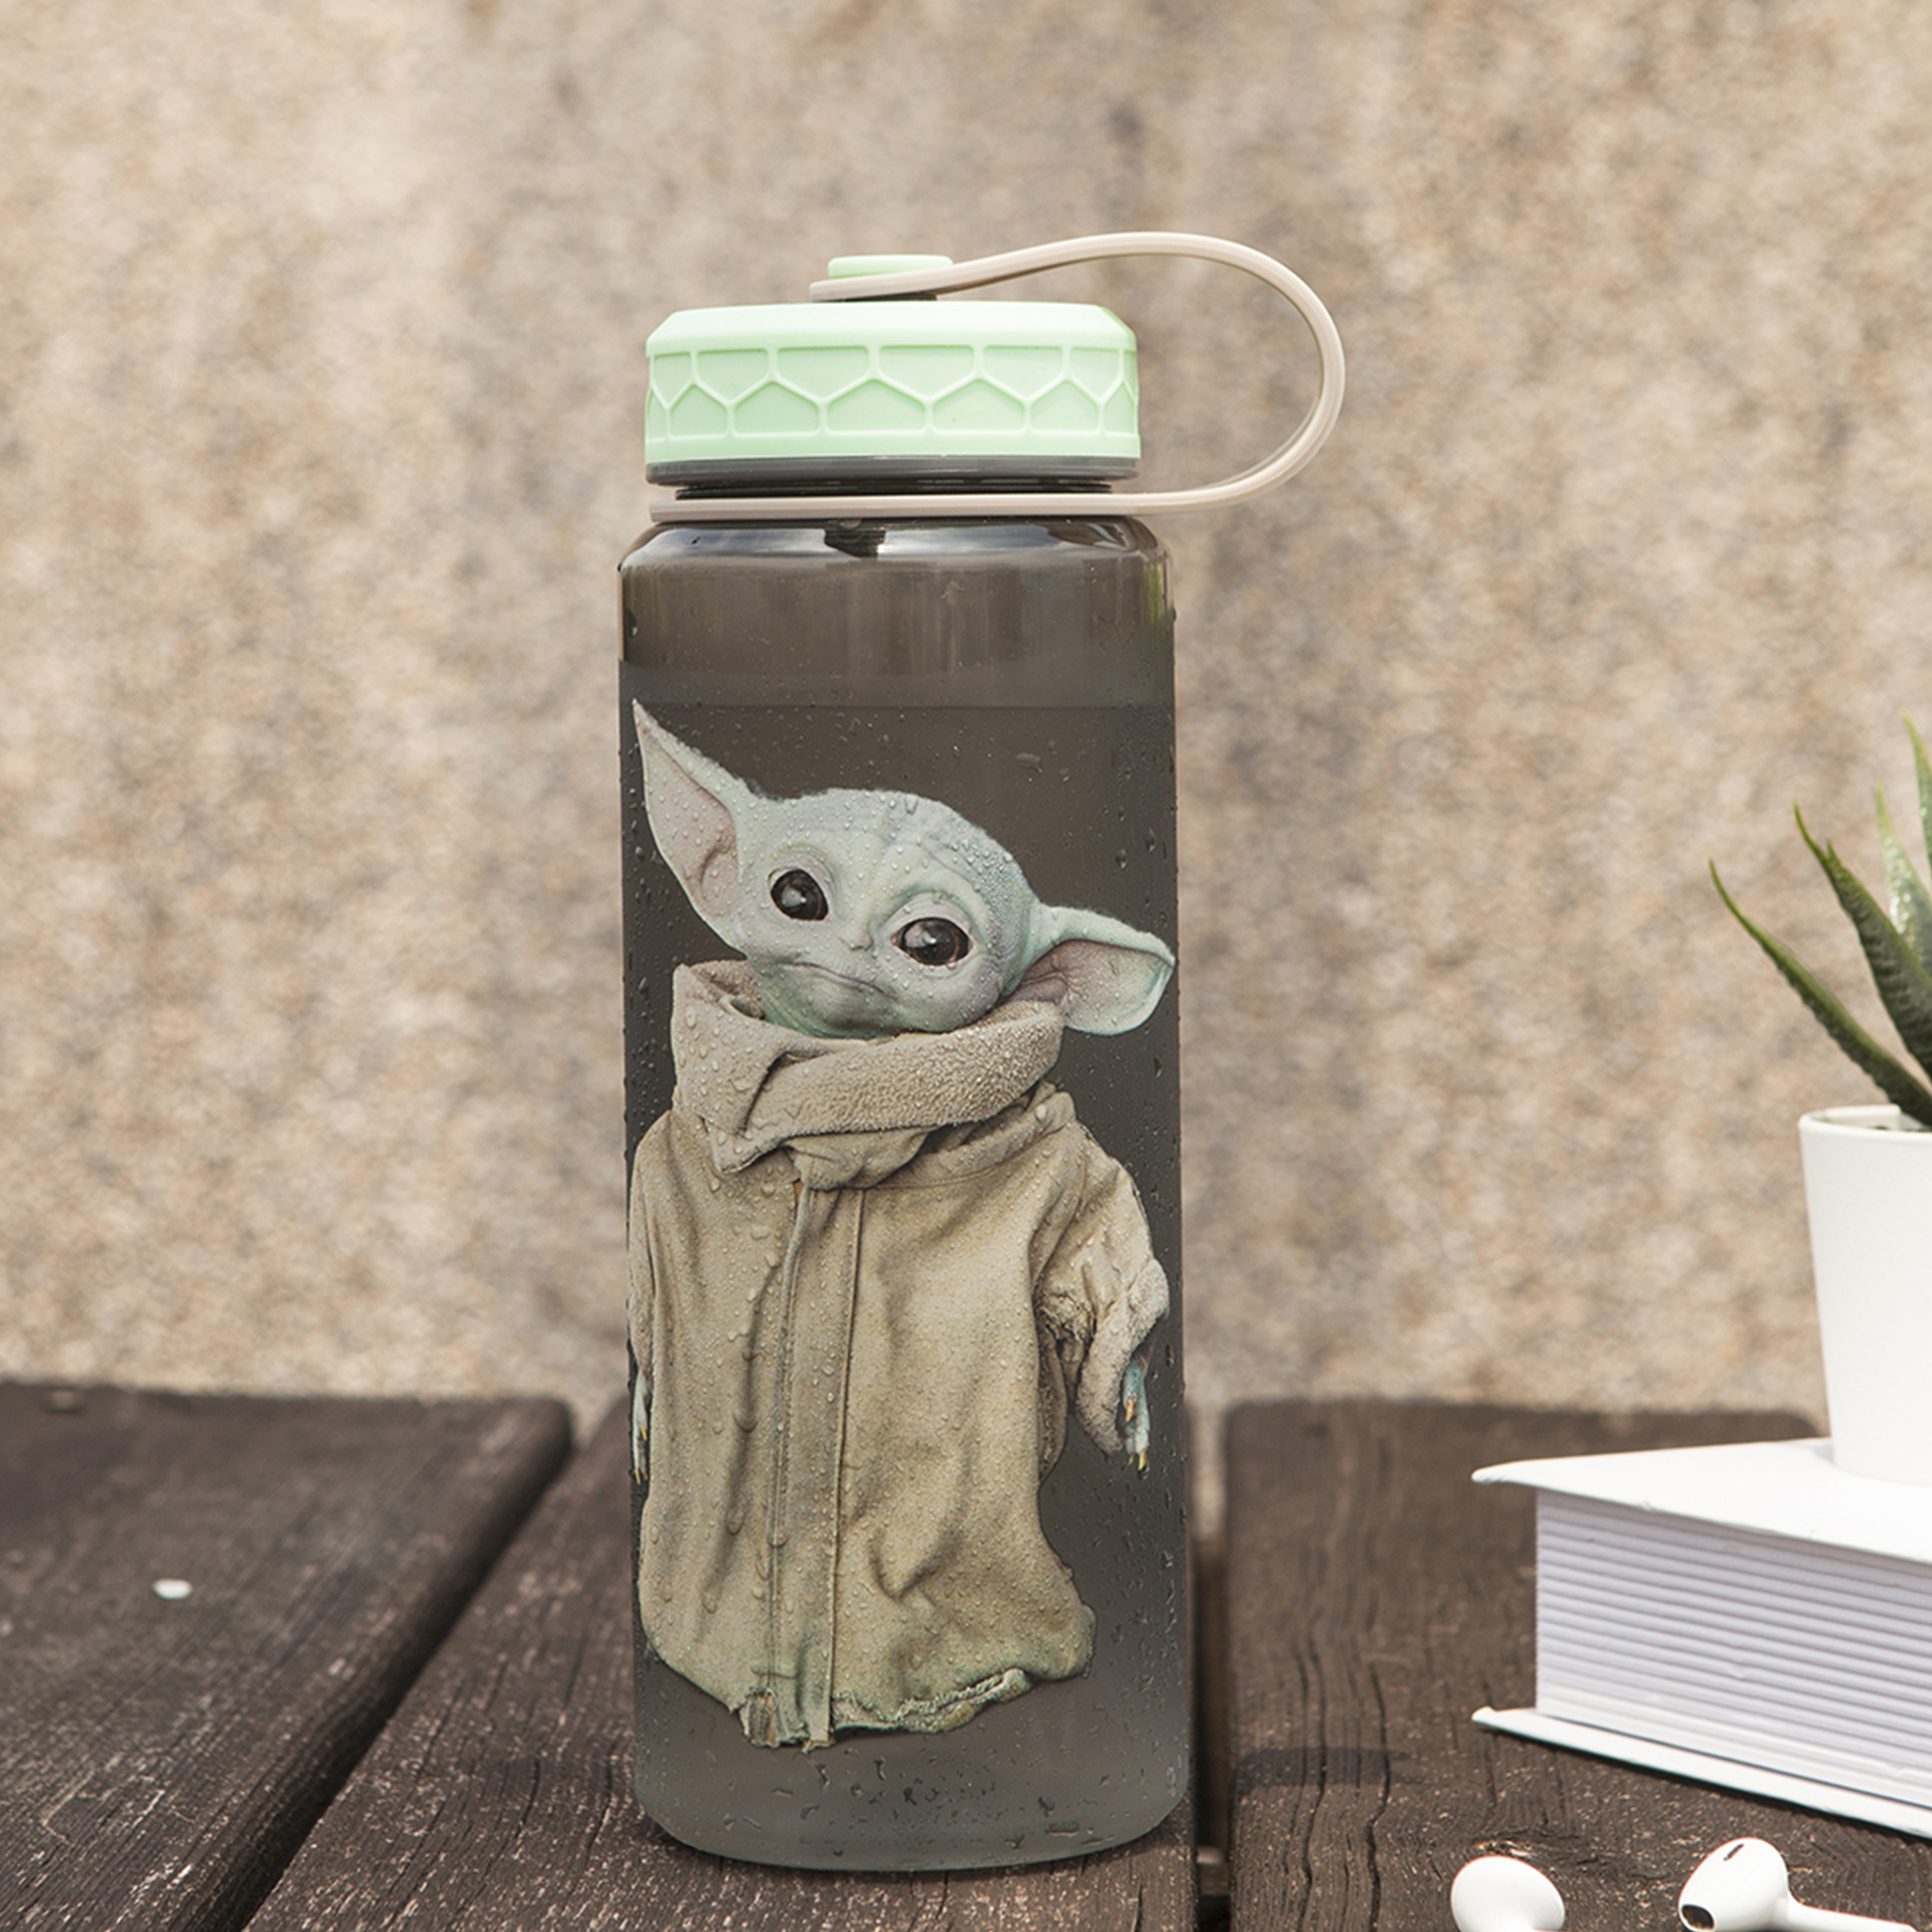 Star Wars: The Mandalorian 36 ounce Reusable Plastic Water Bottle, The Child (Baby Yoda) slideshow image 3